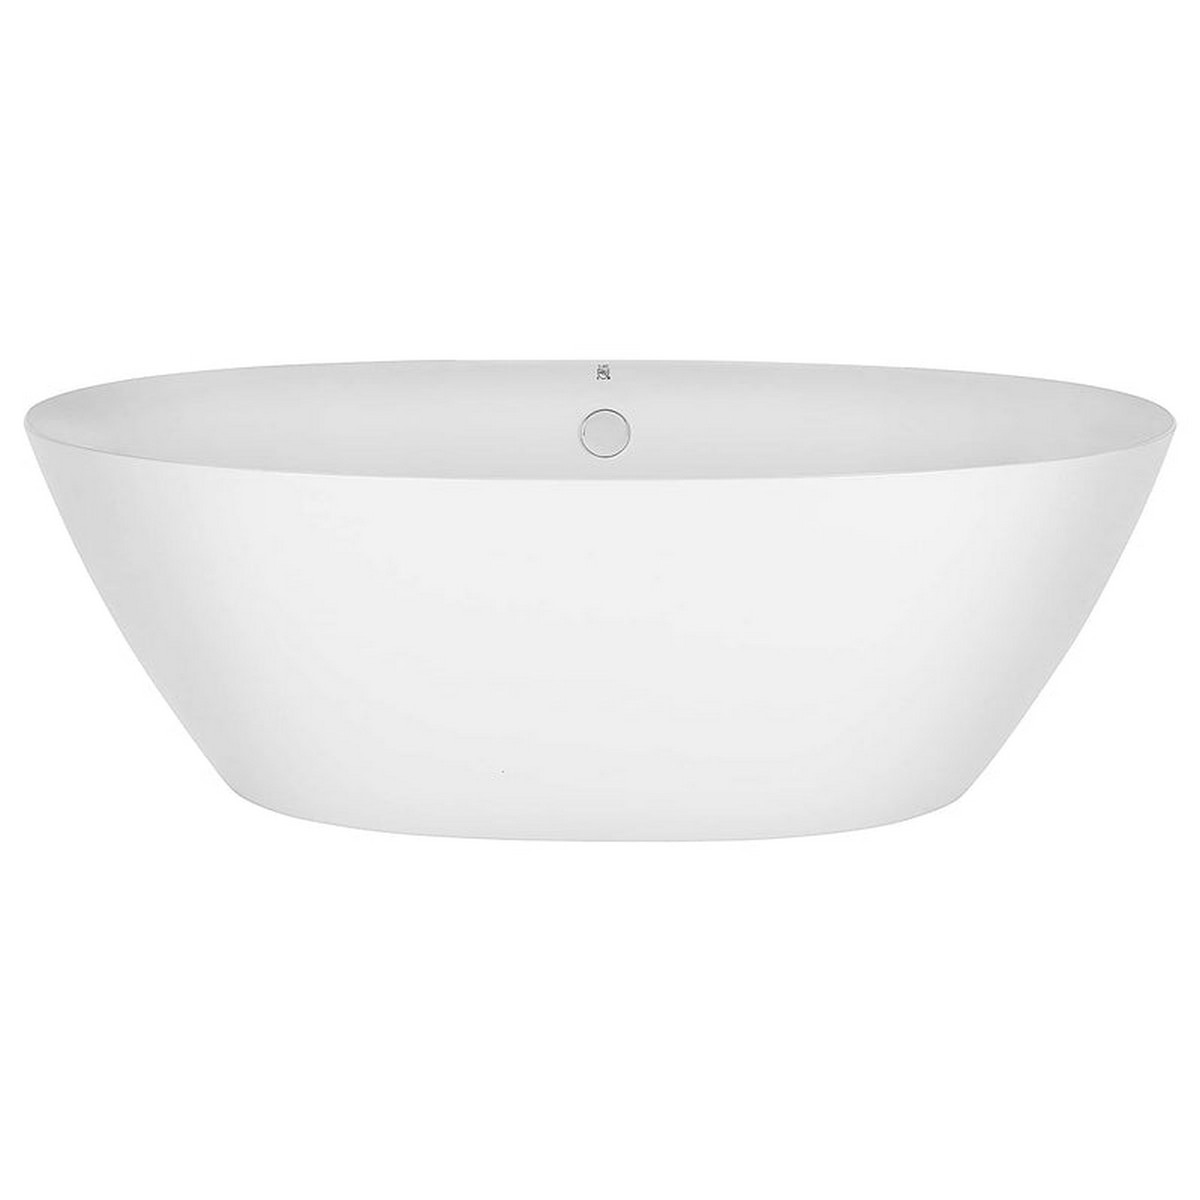 EMPAVA EMPV-71FT1503 70 7/8 X 35 3/8 INCH FREESTANDING OVAL SOAKING BATHTUB WITH CENTER DRAIN IN WHITE